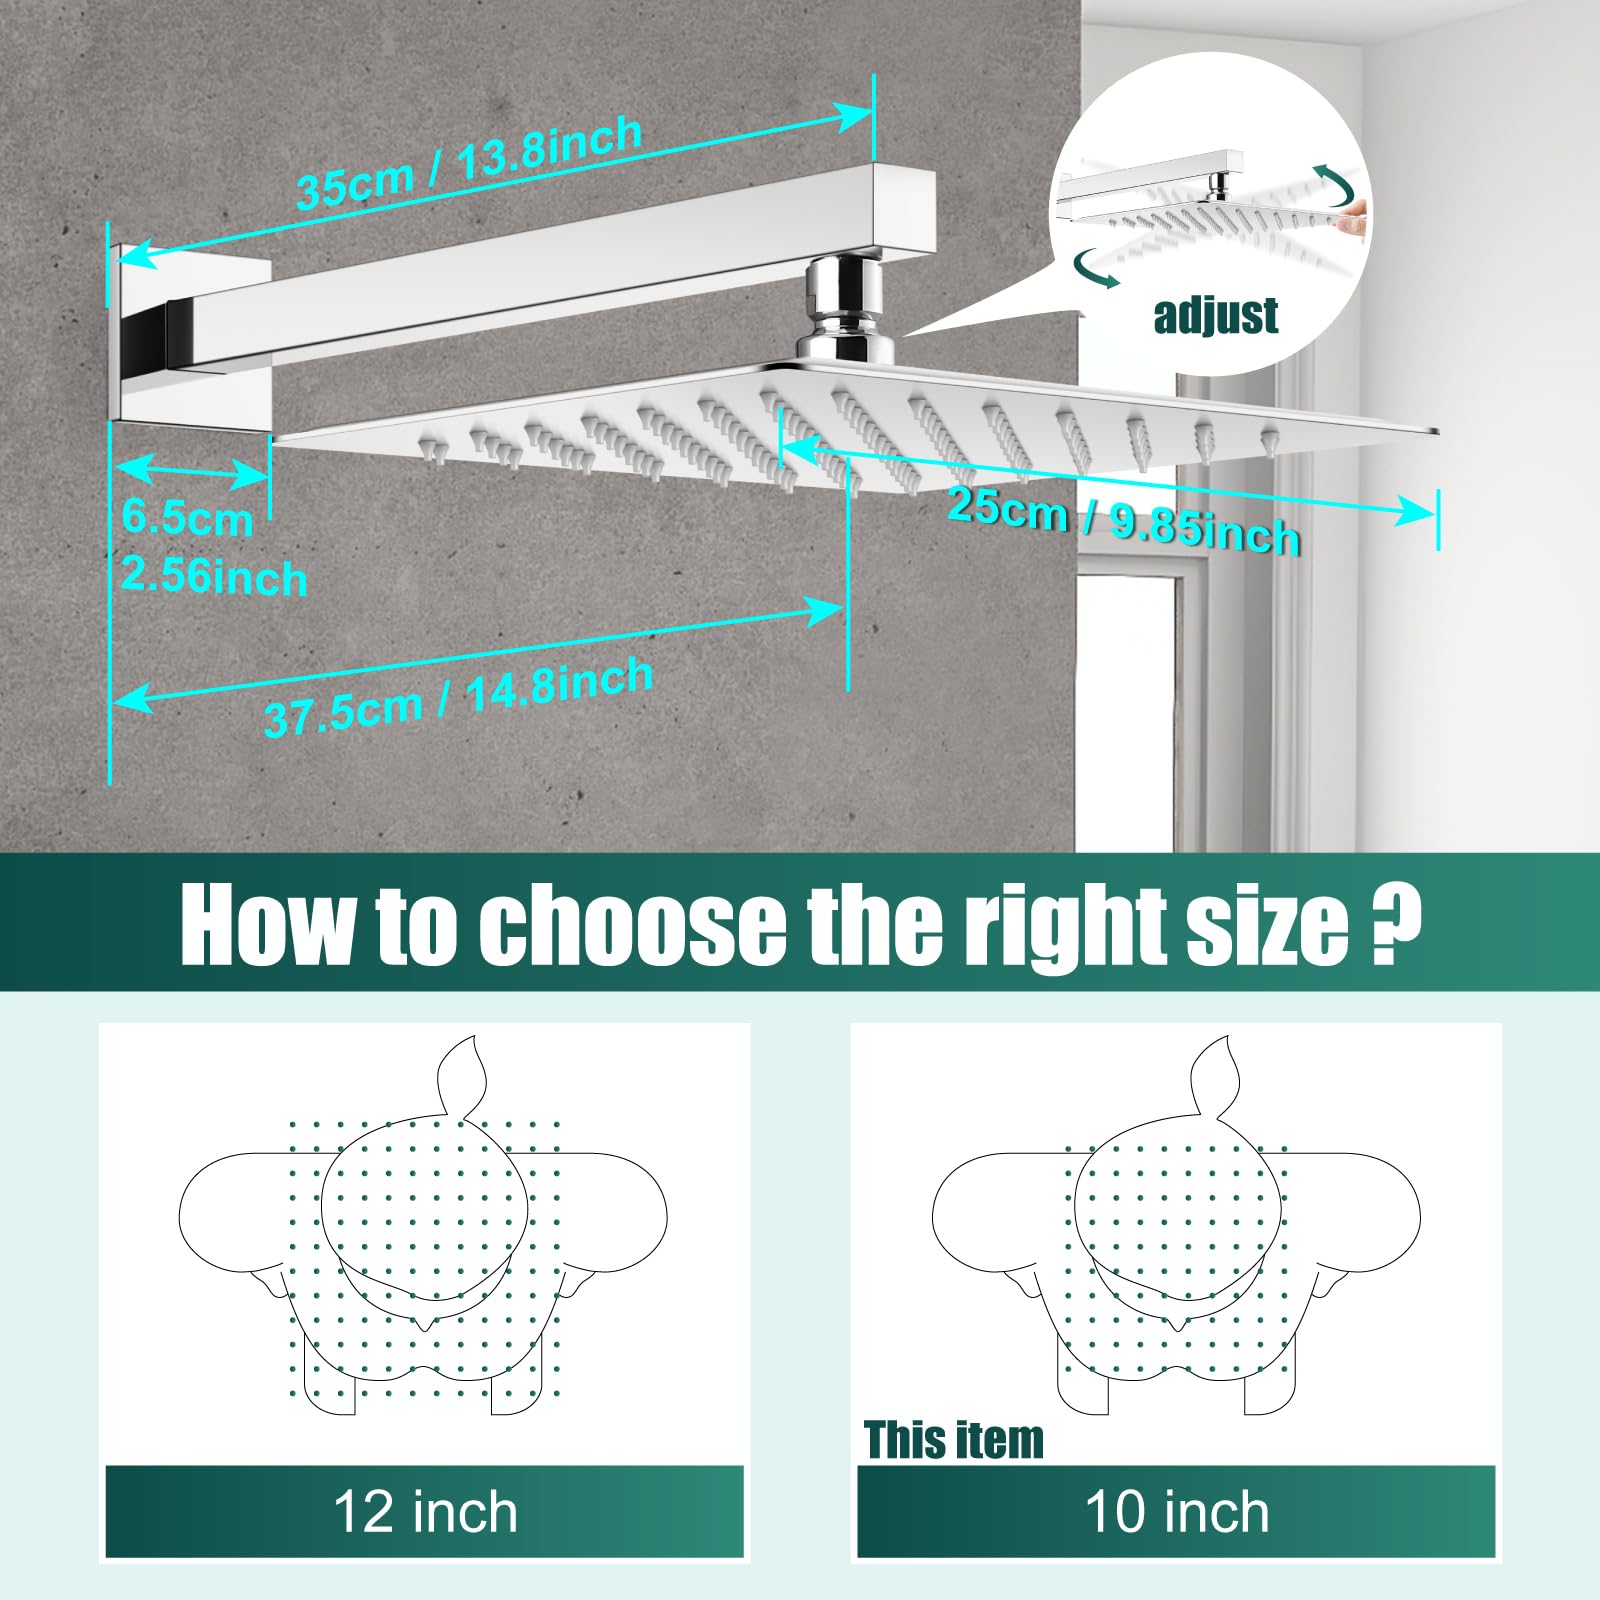 Heyalan Shower System Square Rain Shower System Head Shower Faucet Fixture 2 in 1 Handheld Shower Sprayer Rough in Valve Wall Mount Bathroom Rainfall Combo Set High Pressure,10 Inch,Polished Chrome